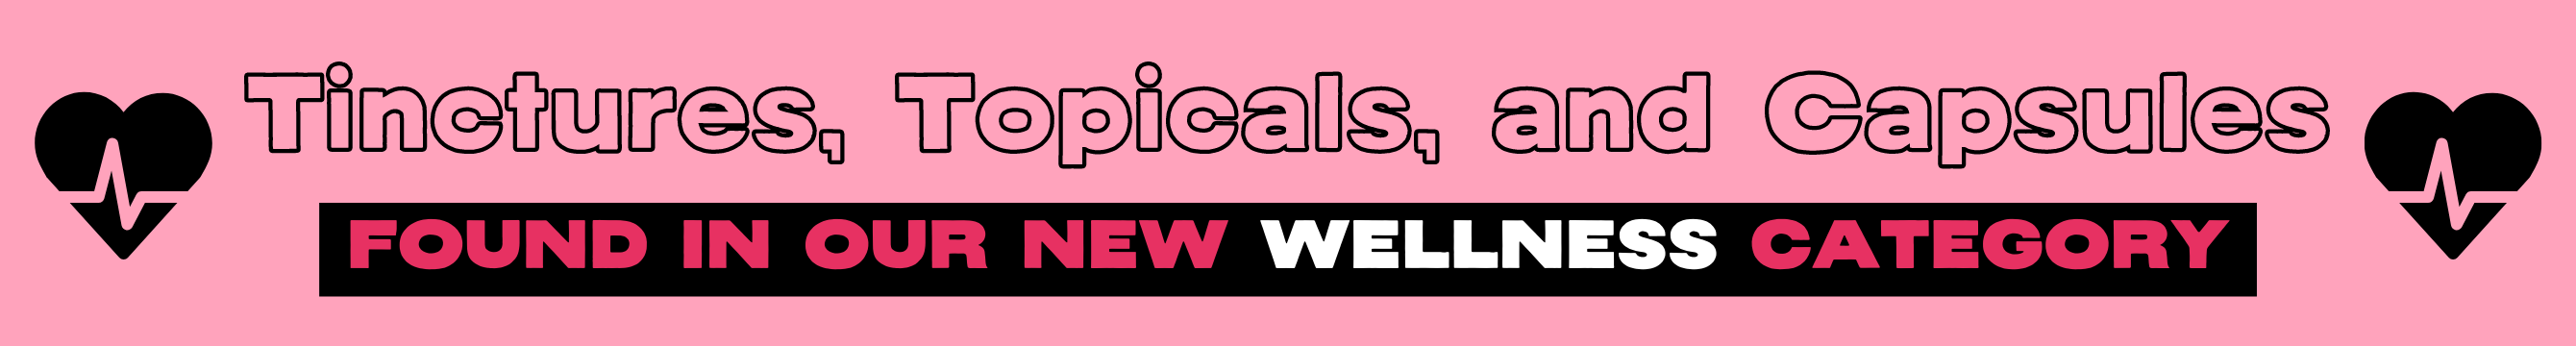 Tinctures, Topicals, and Capsules are now found in our new Wellness category